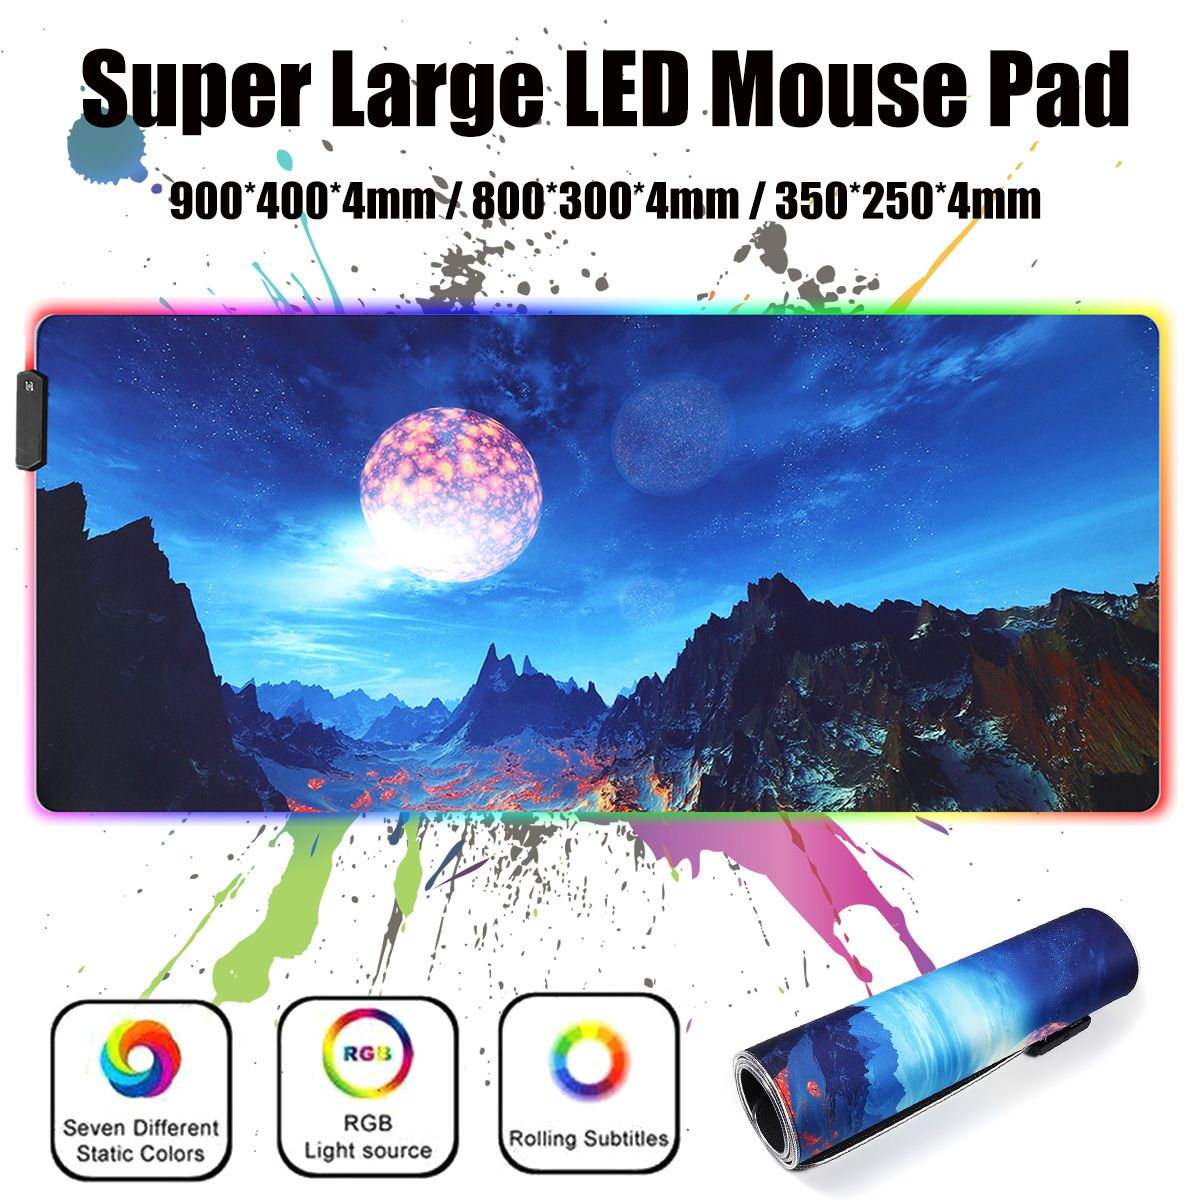 The-Snow-Mountain-USB-Wired-RGB-Colorful-Backlit-LED-Mouse-Pad-for-Gaming-Mouse-1550126